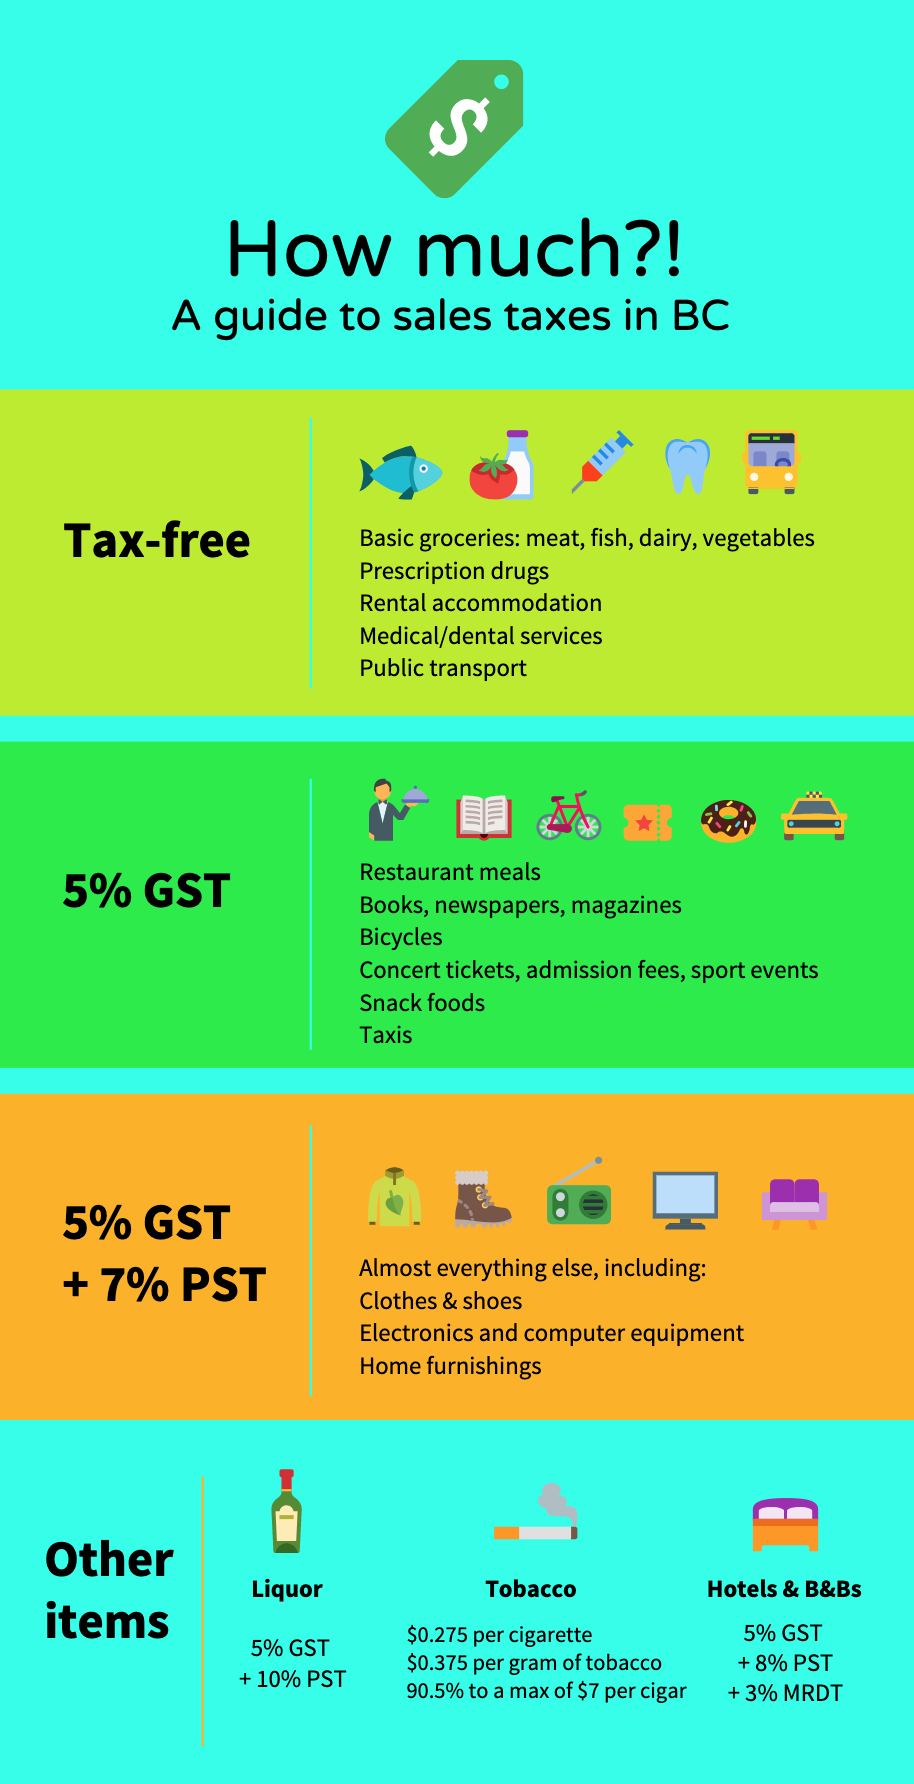 A guide to sales taxes in BC: tax-free items, items subject to 5% GST, items subject to 5% GST + 7% PST, tobacco tax, alcohol, tourist accommodation